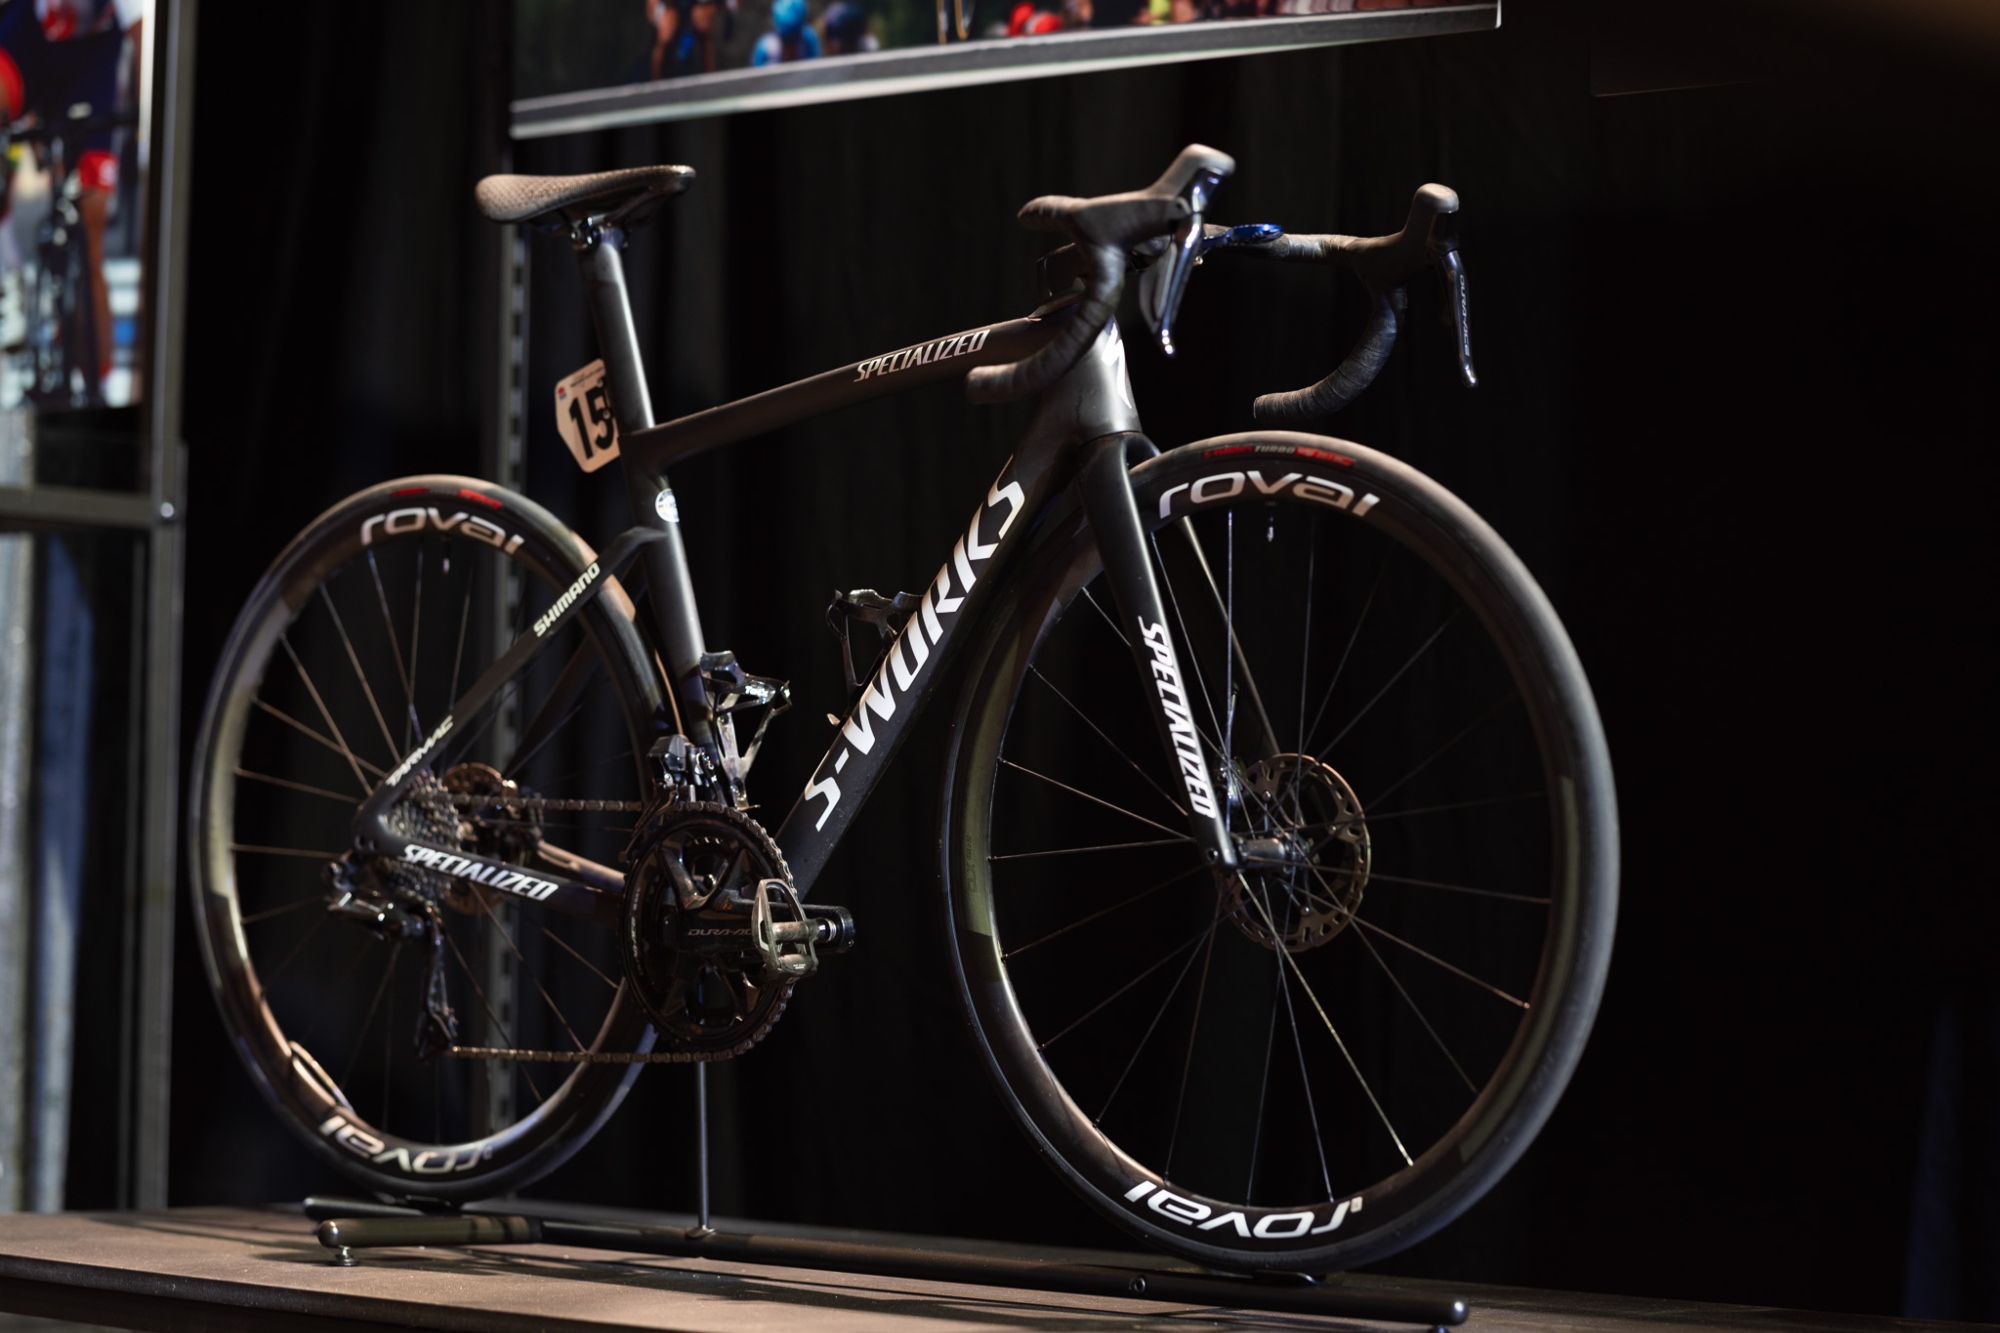 Remco Evenepoel's world championship winning Specialized Tarmac SL7 on display at the Made in Racing Experience